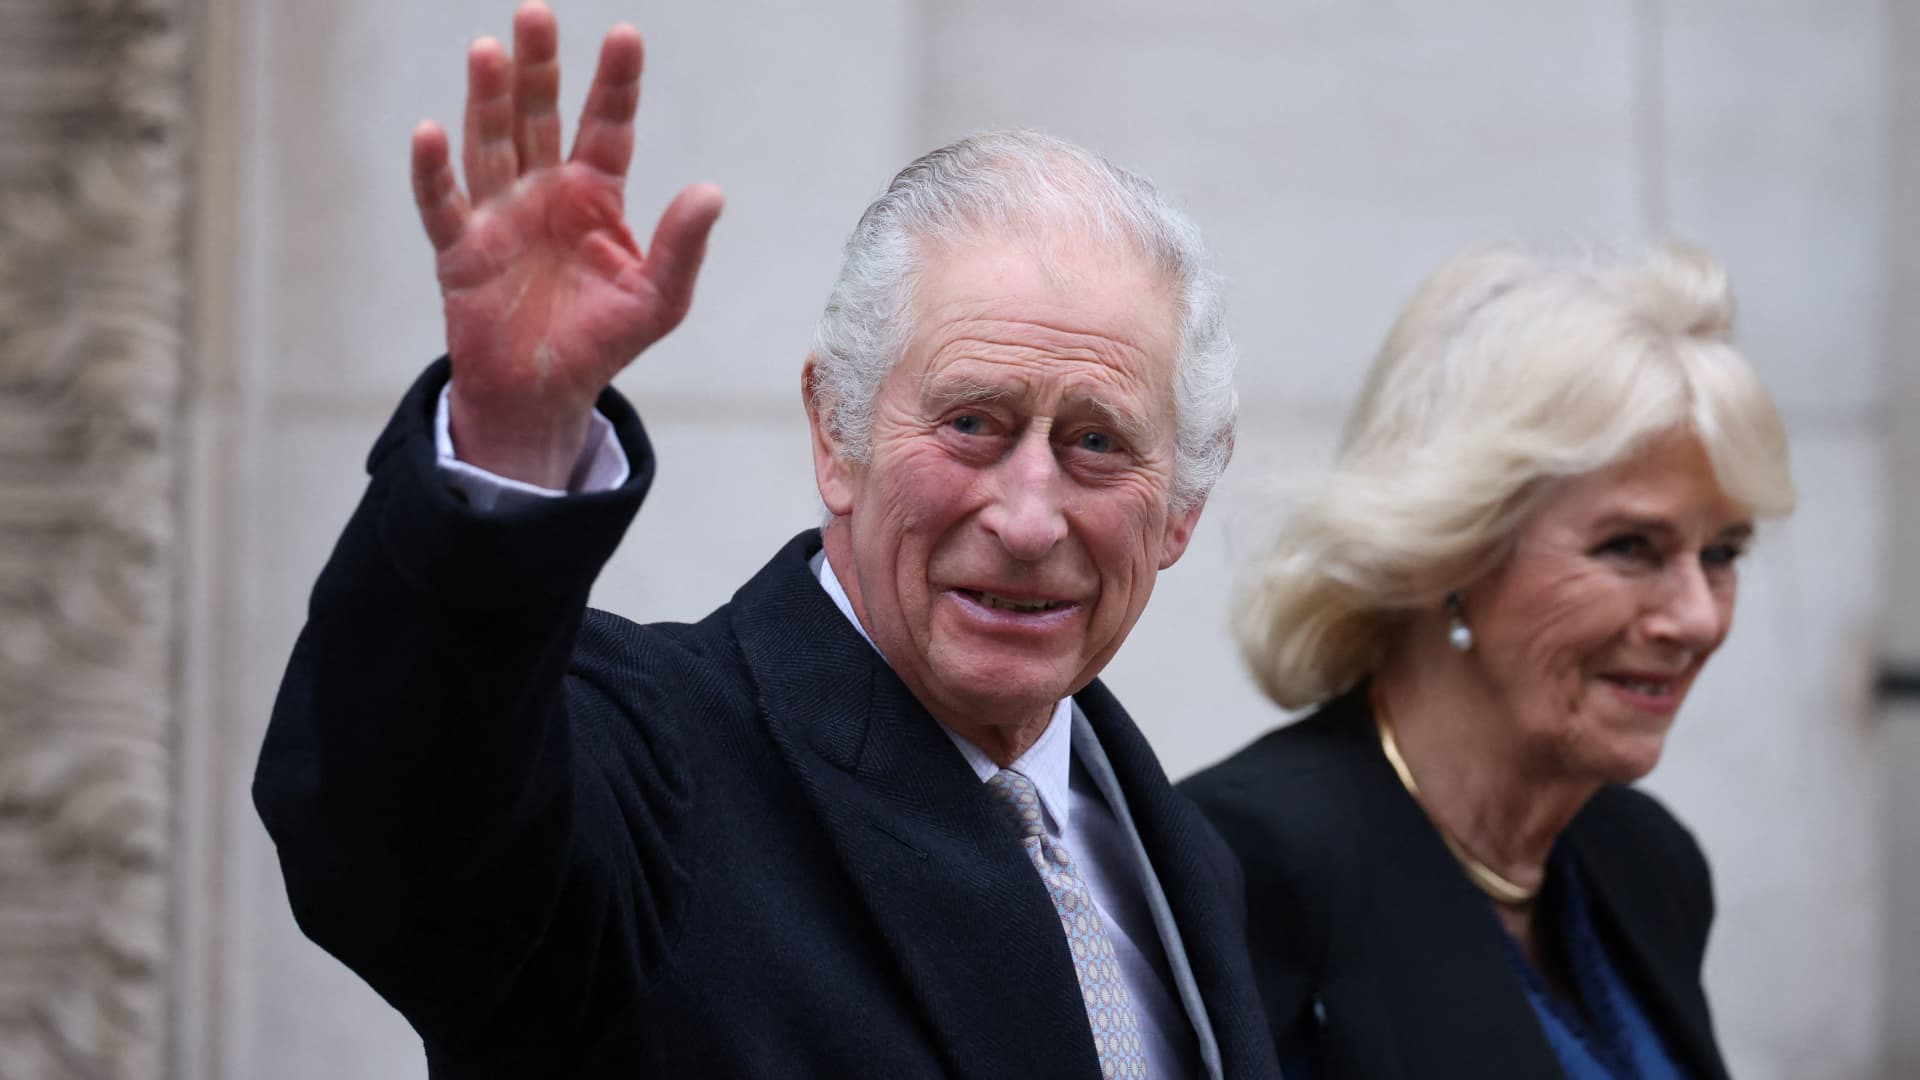 Britain’s King Charles III will resume general public obligations following 7 days soon after cancer remedy, palace states